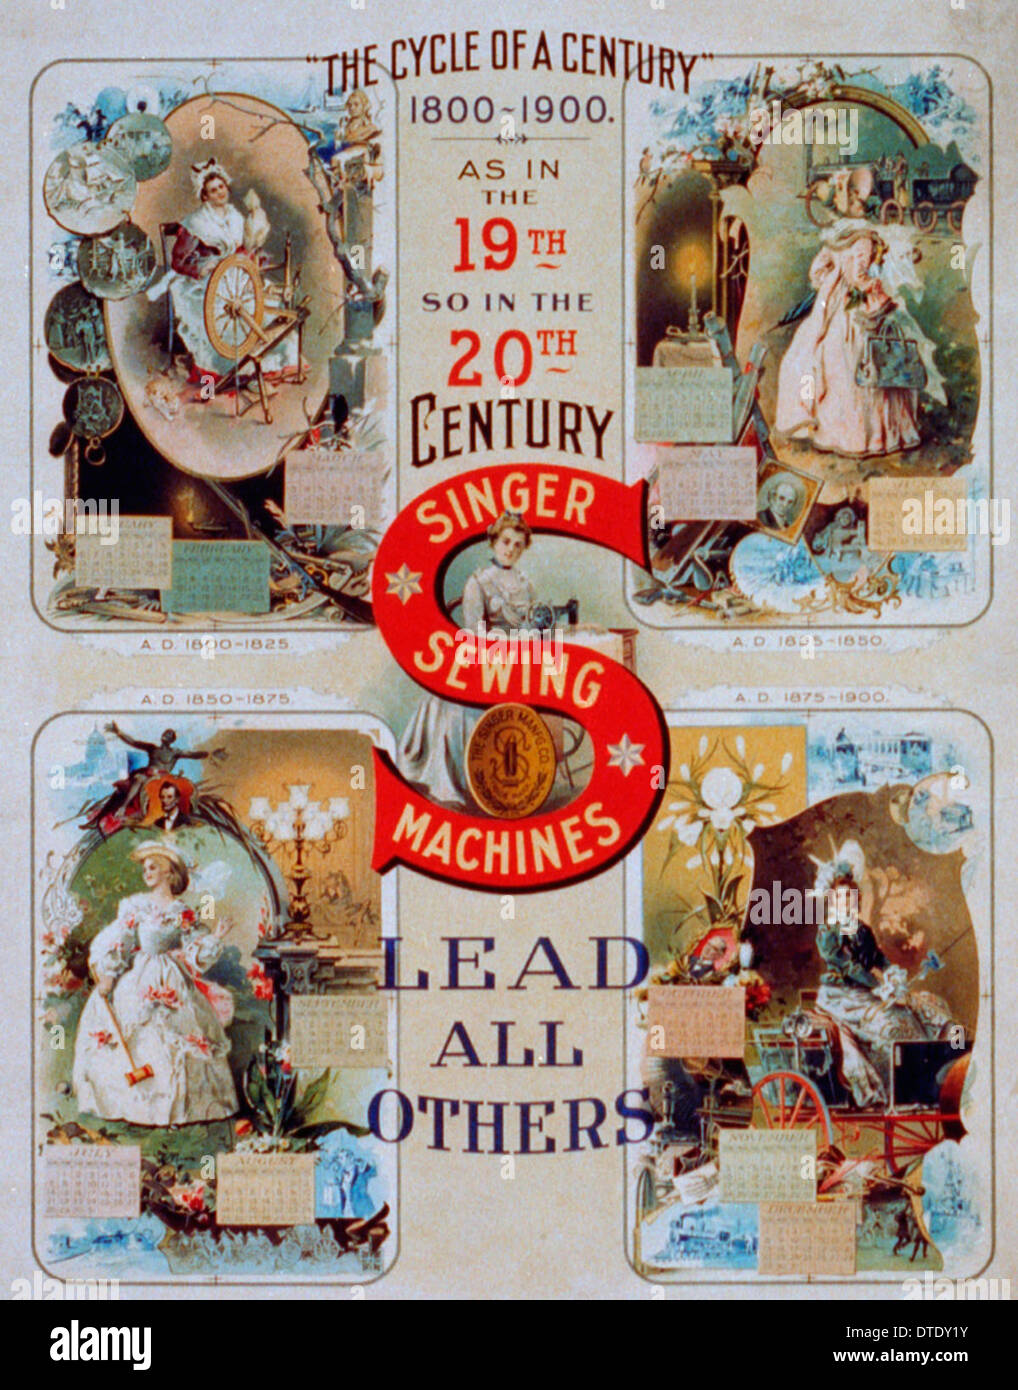 'The cycle of a century' 1800-1900. Singer sewing machines lead all others - Singer sewing machine advertisement, circa 1900 Stock Photo